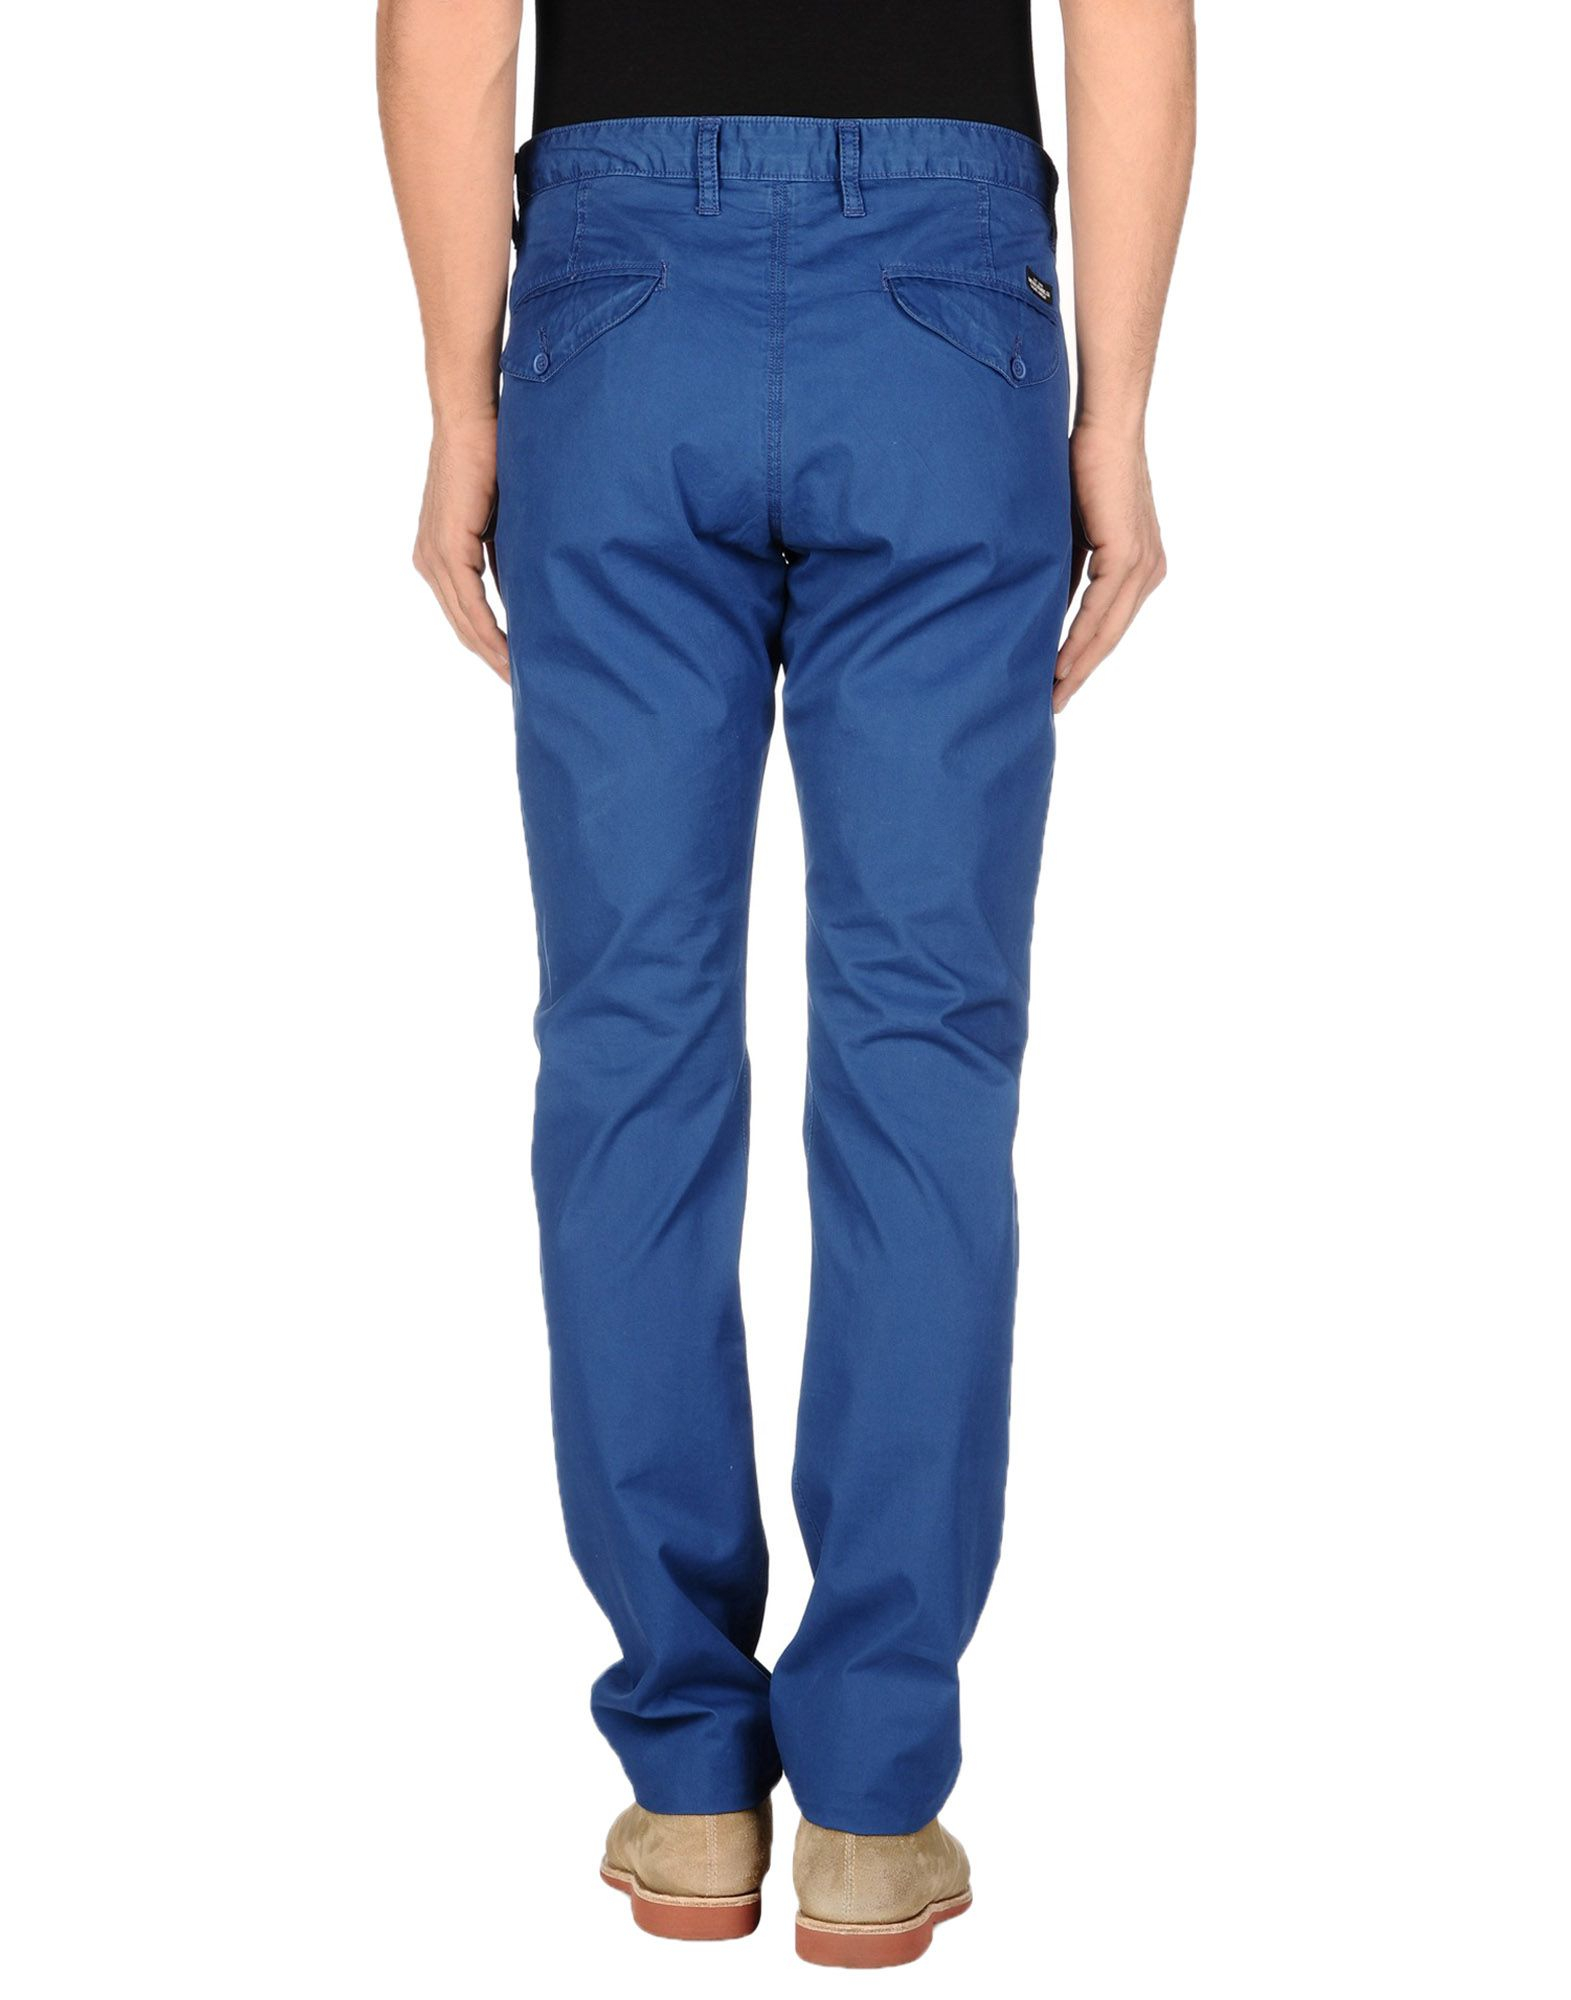 Lyst - Lee Jeans Casual Pants in Blue for Men